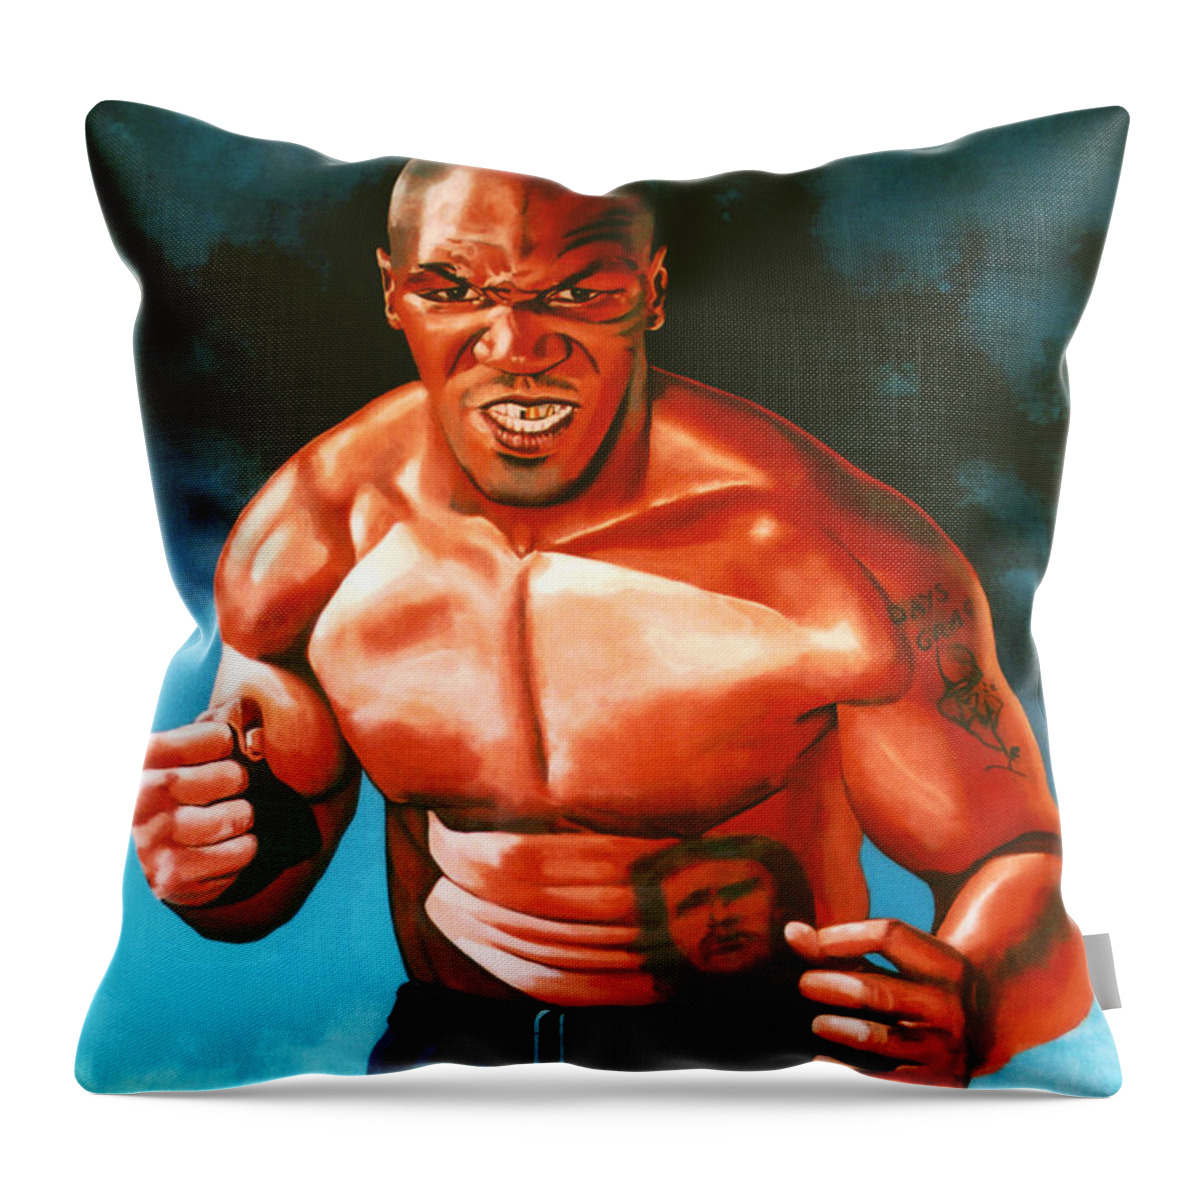 Mike Tyson Throw Pillow featuring the painting Mike Tyson #1 by Paul Meijering